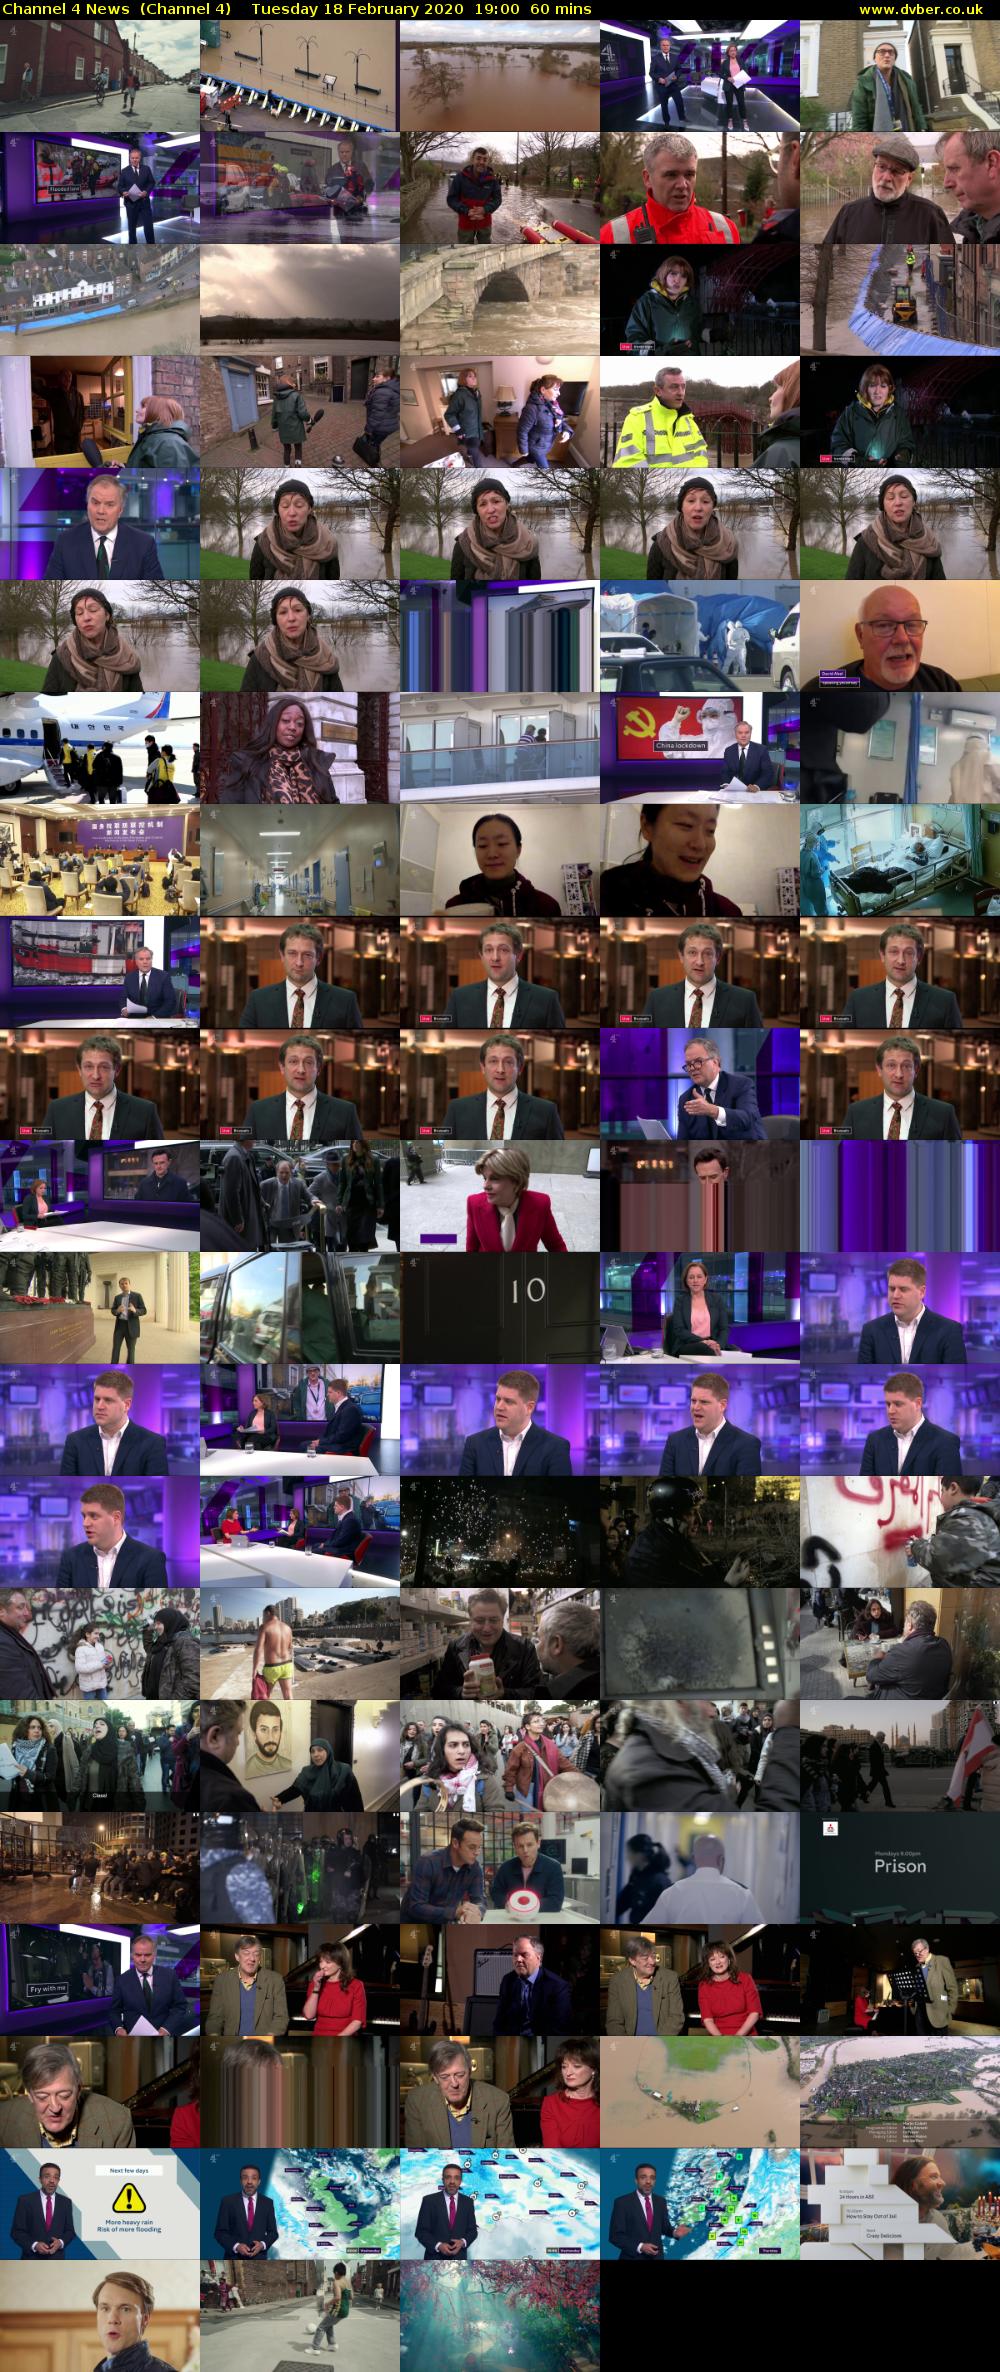 Channel 4 News  (Channel 4) Tuesday 18 February 2020 19:00 - 20:00